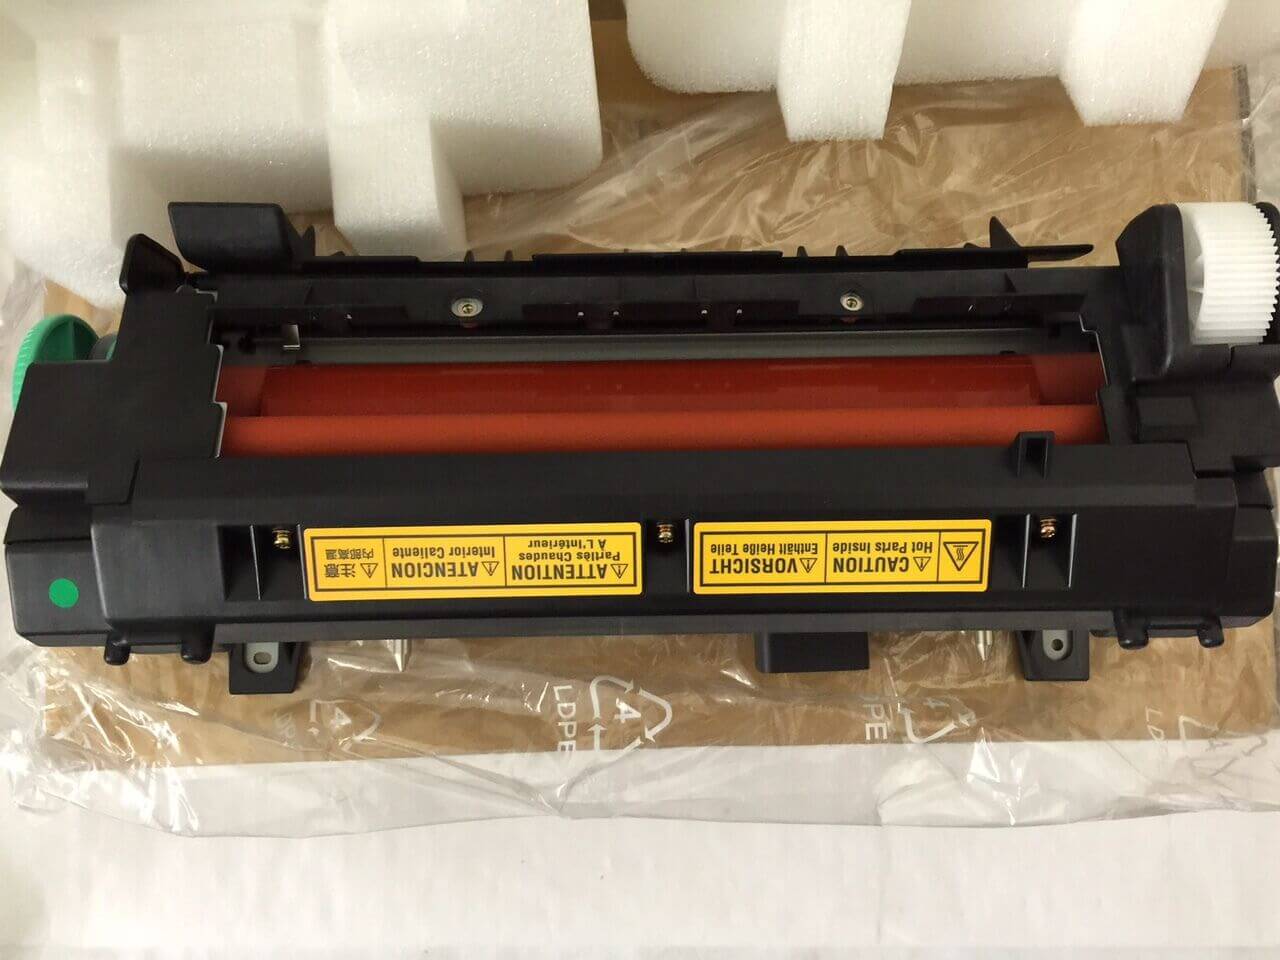 NEW- Open Box Lexmark 12C0575 Fuser Assembly for Optra 5040 *SAME DAY SHIPPING!* - copier-clearance-center